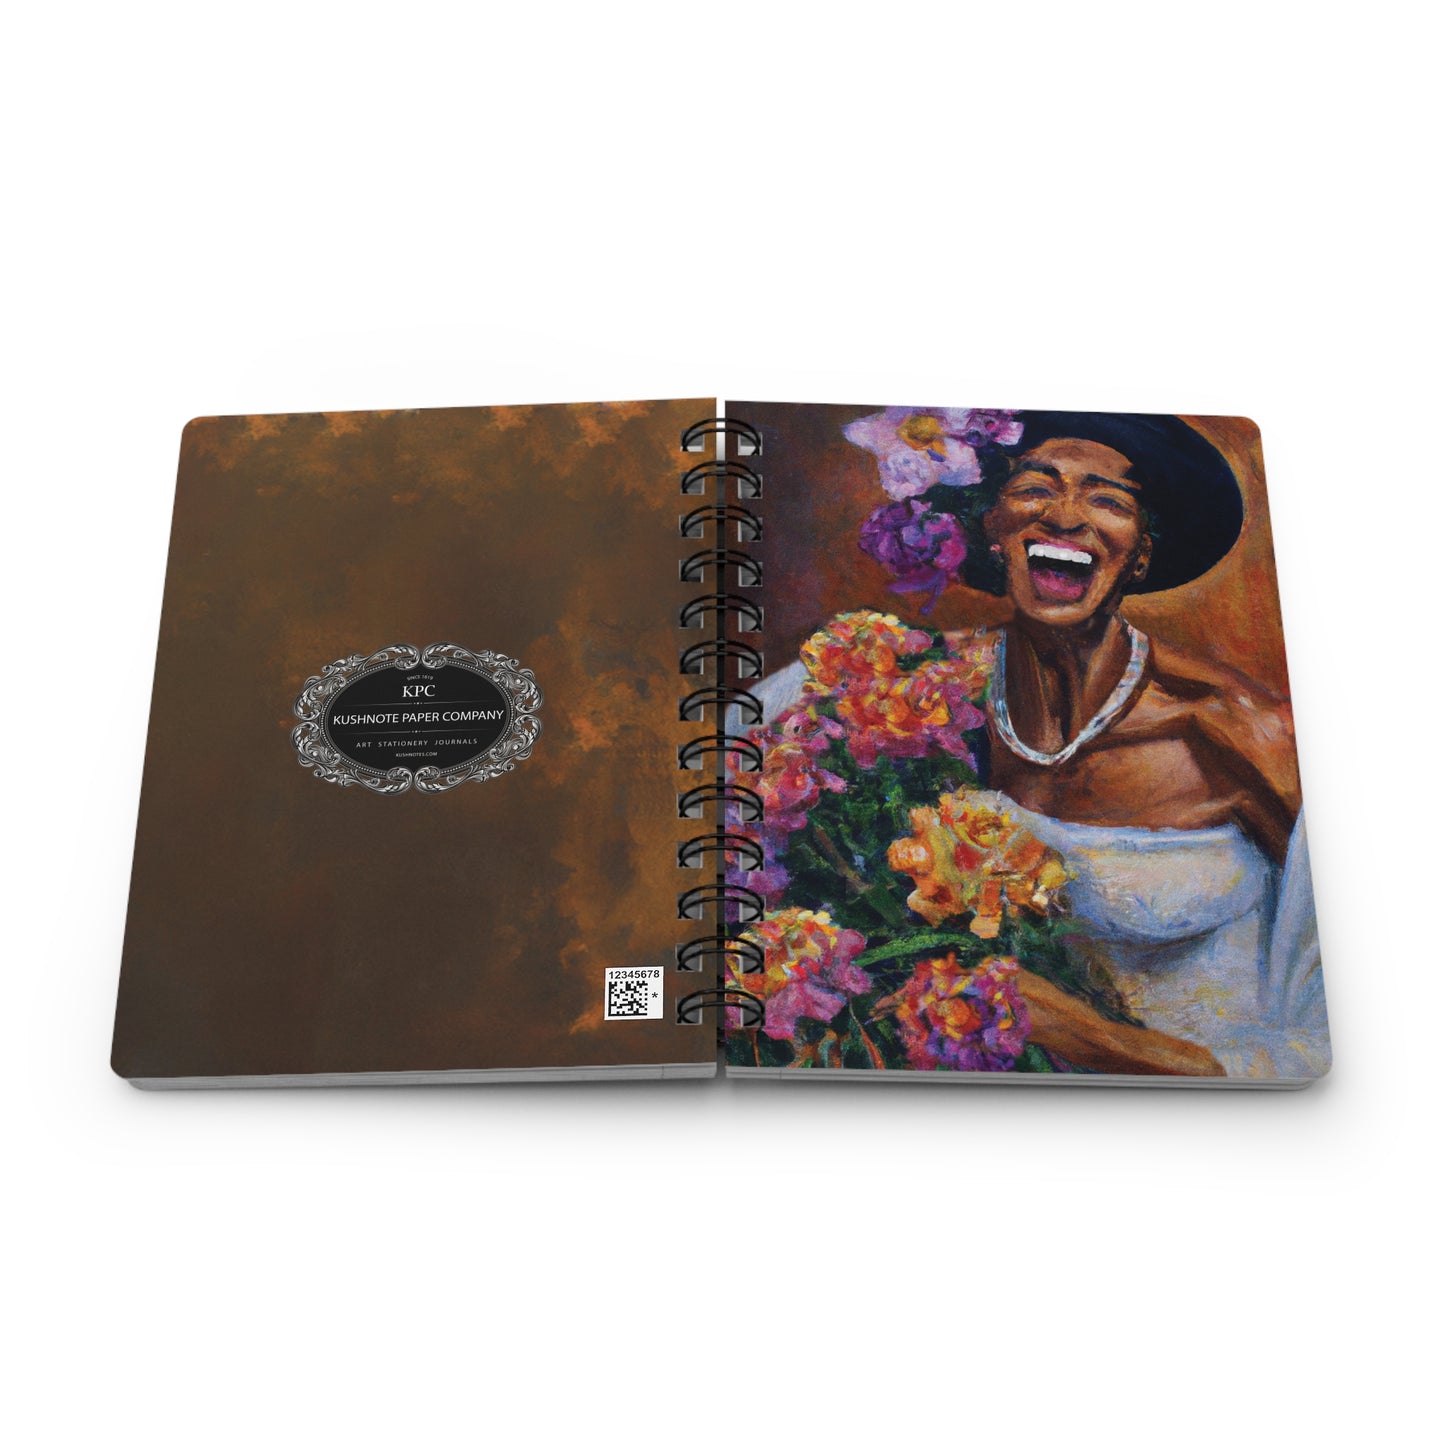 Pearls and Lace Spiral Bound Notebooks and Journals with 2023-2024 Year-at-a-Glance Calendar